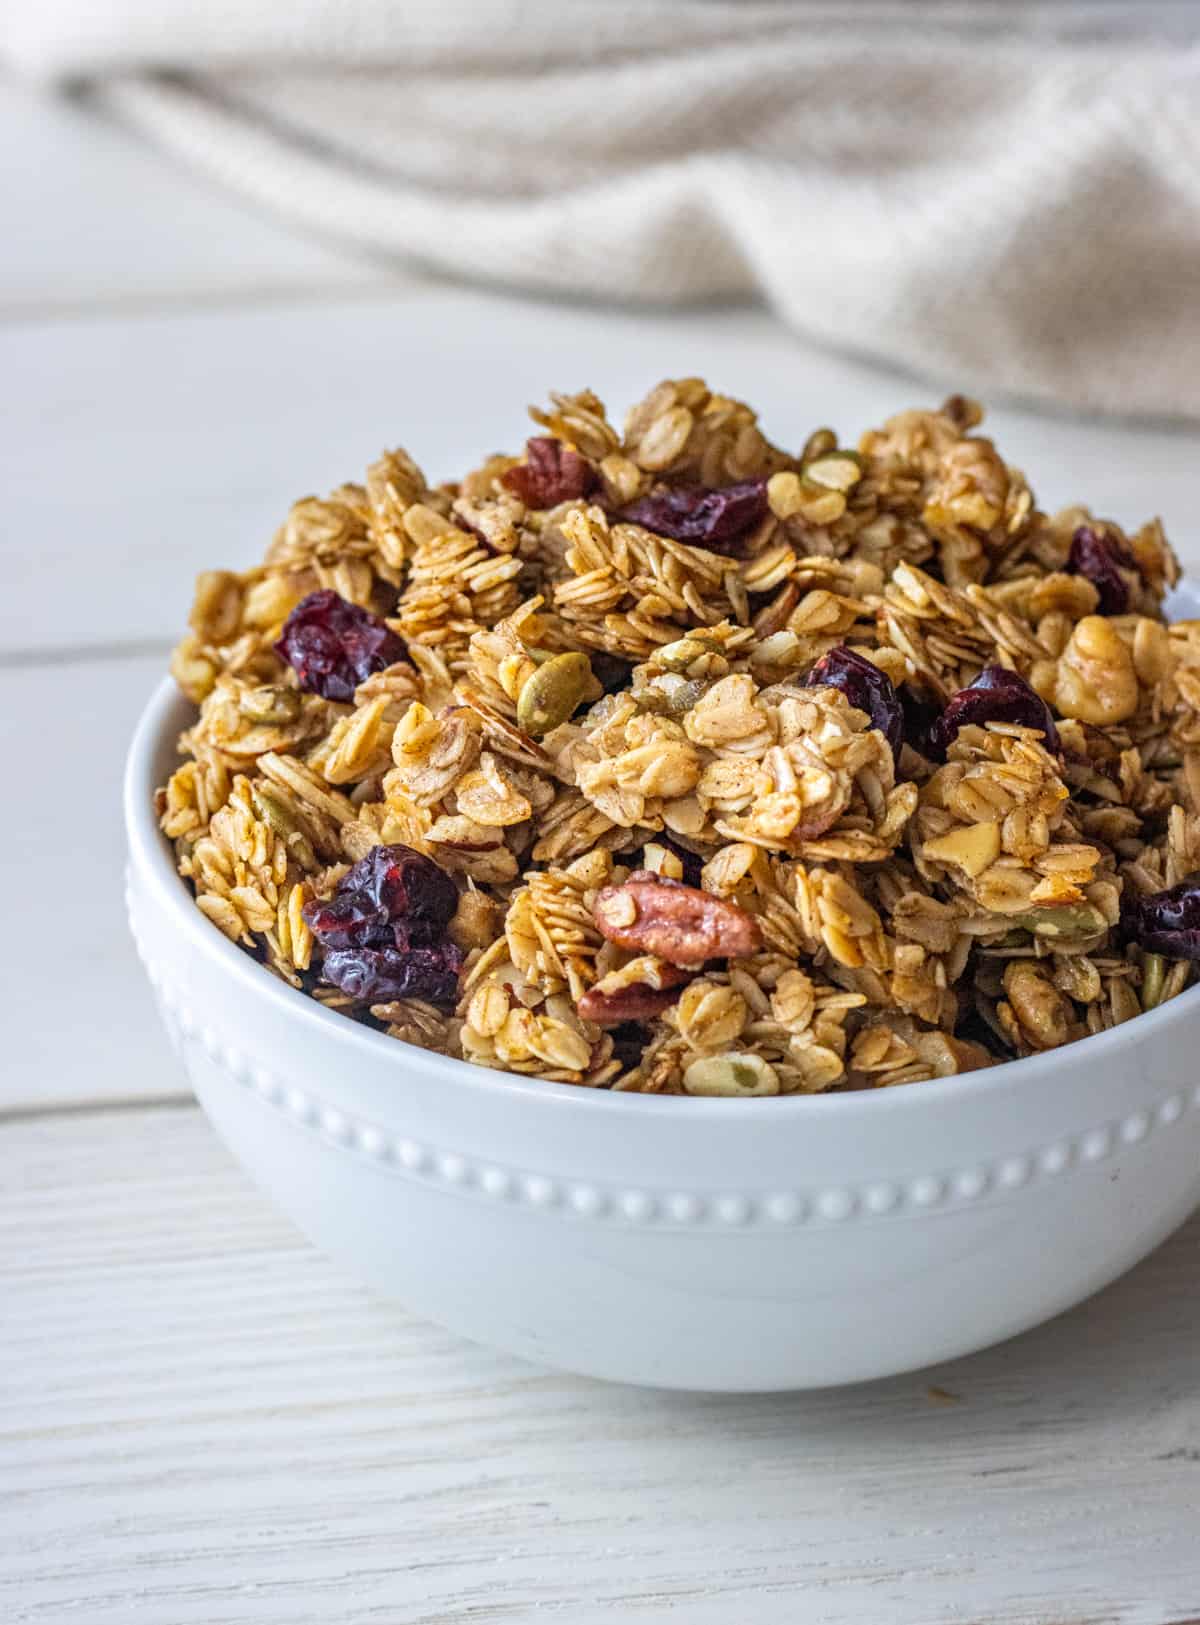 Bowl of granola with a cloth napkin in the background.